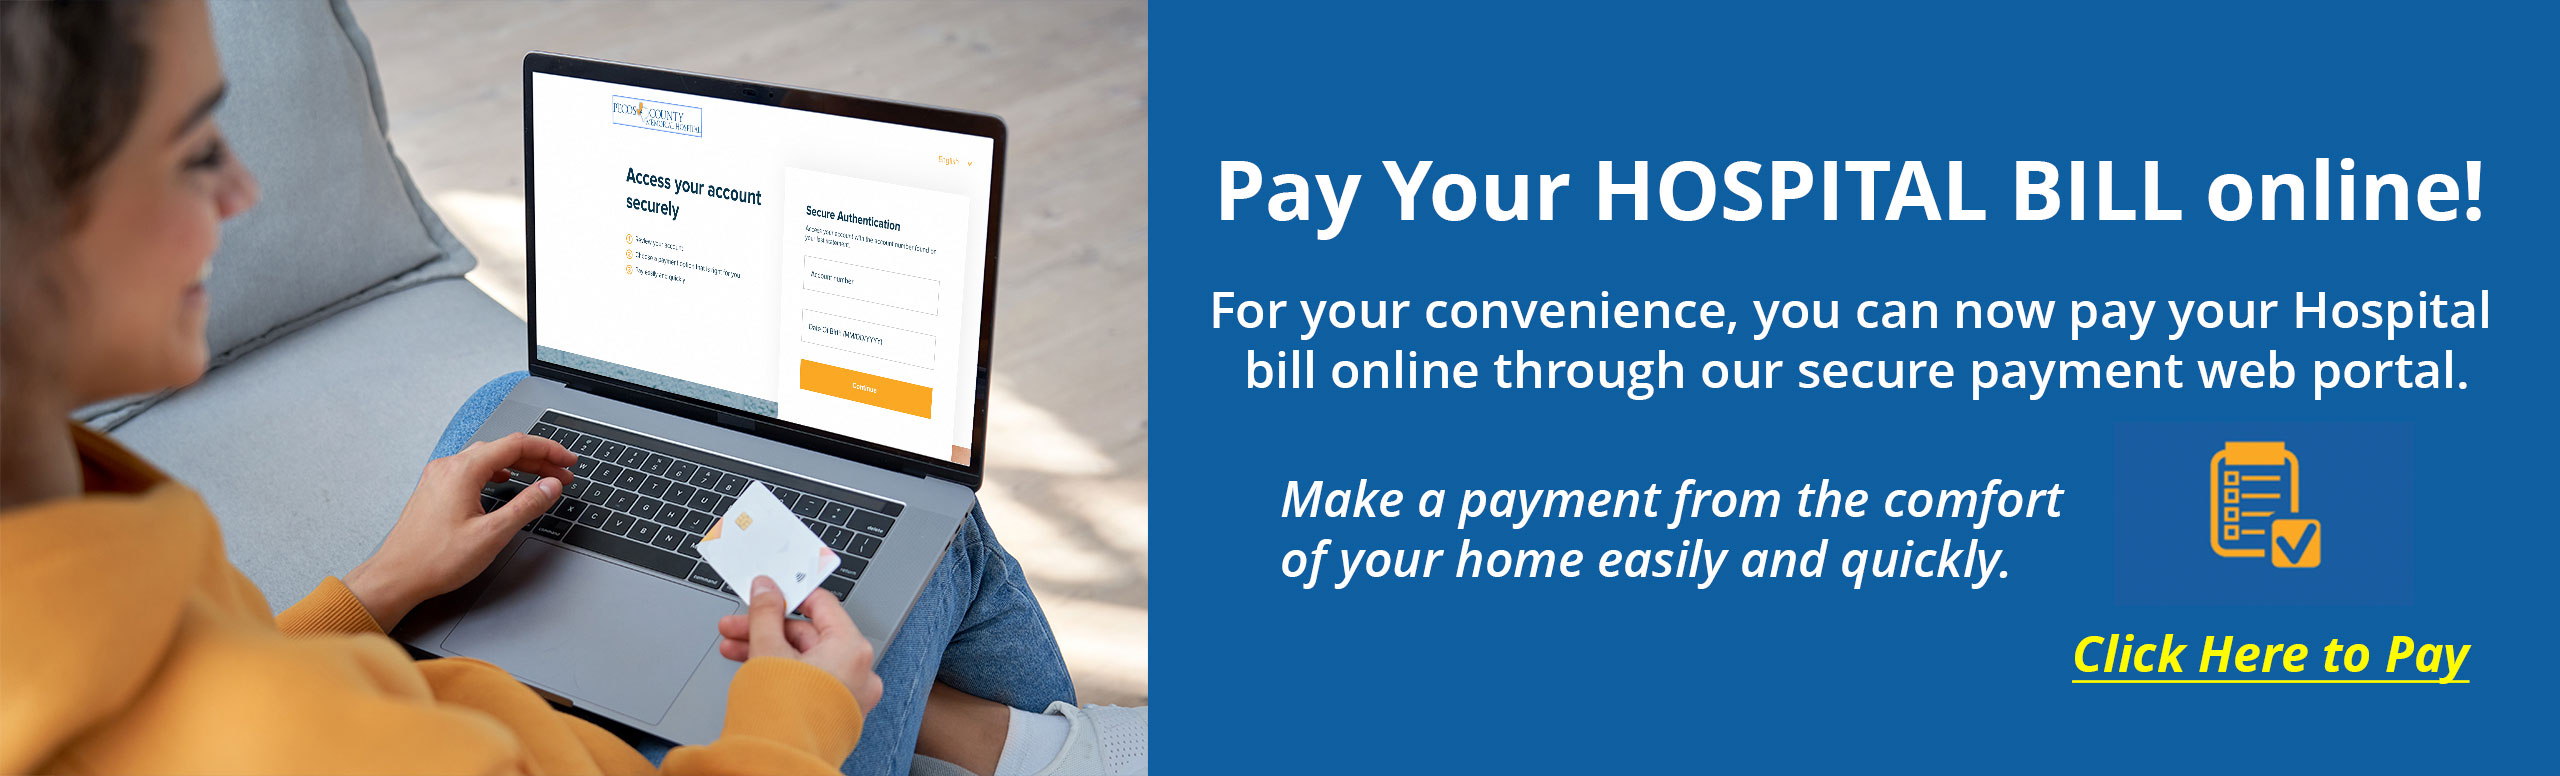 Pictured is a female paying a bill online. 

Pay Your Hospital Bill Online!

For your convenience, you can now pay your Hospital 
bill online through our secure payment web portal.

Make a payment from the comfort 
of your home easily and quickly.